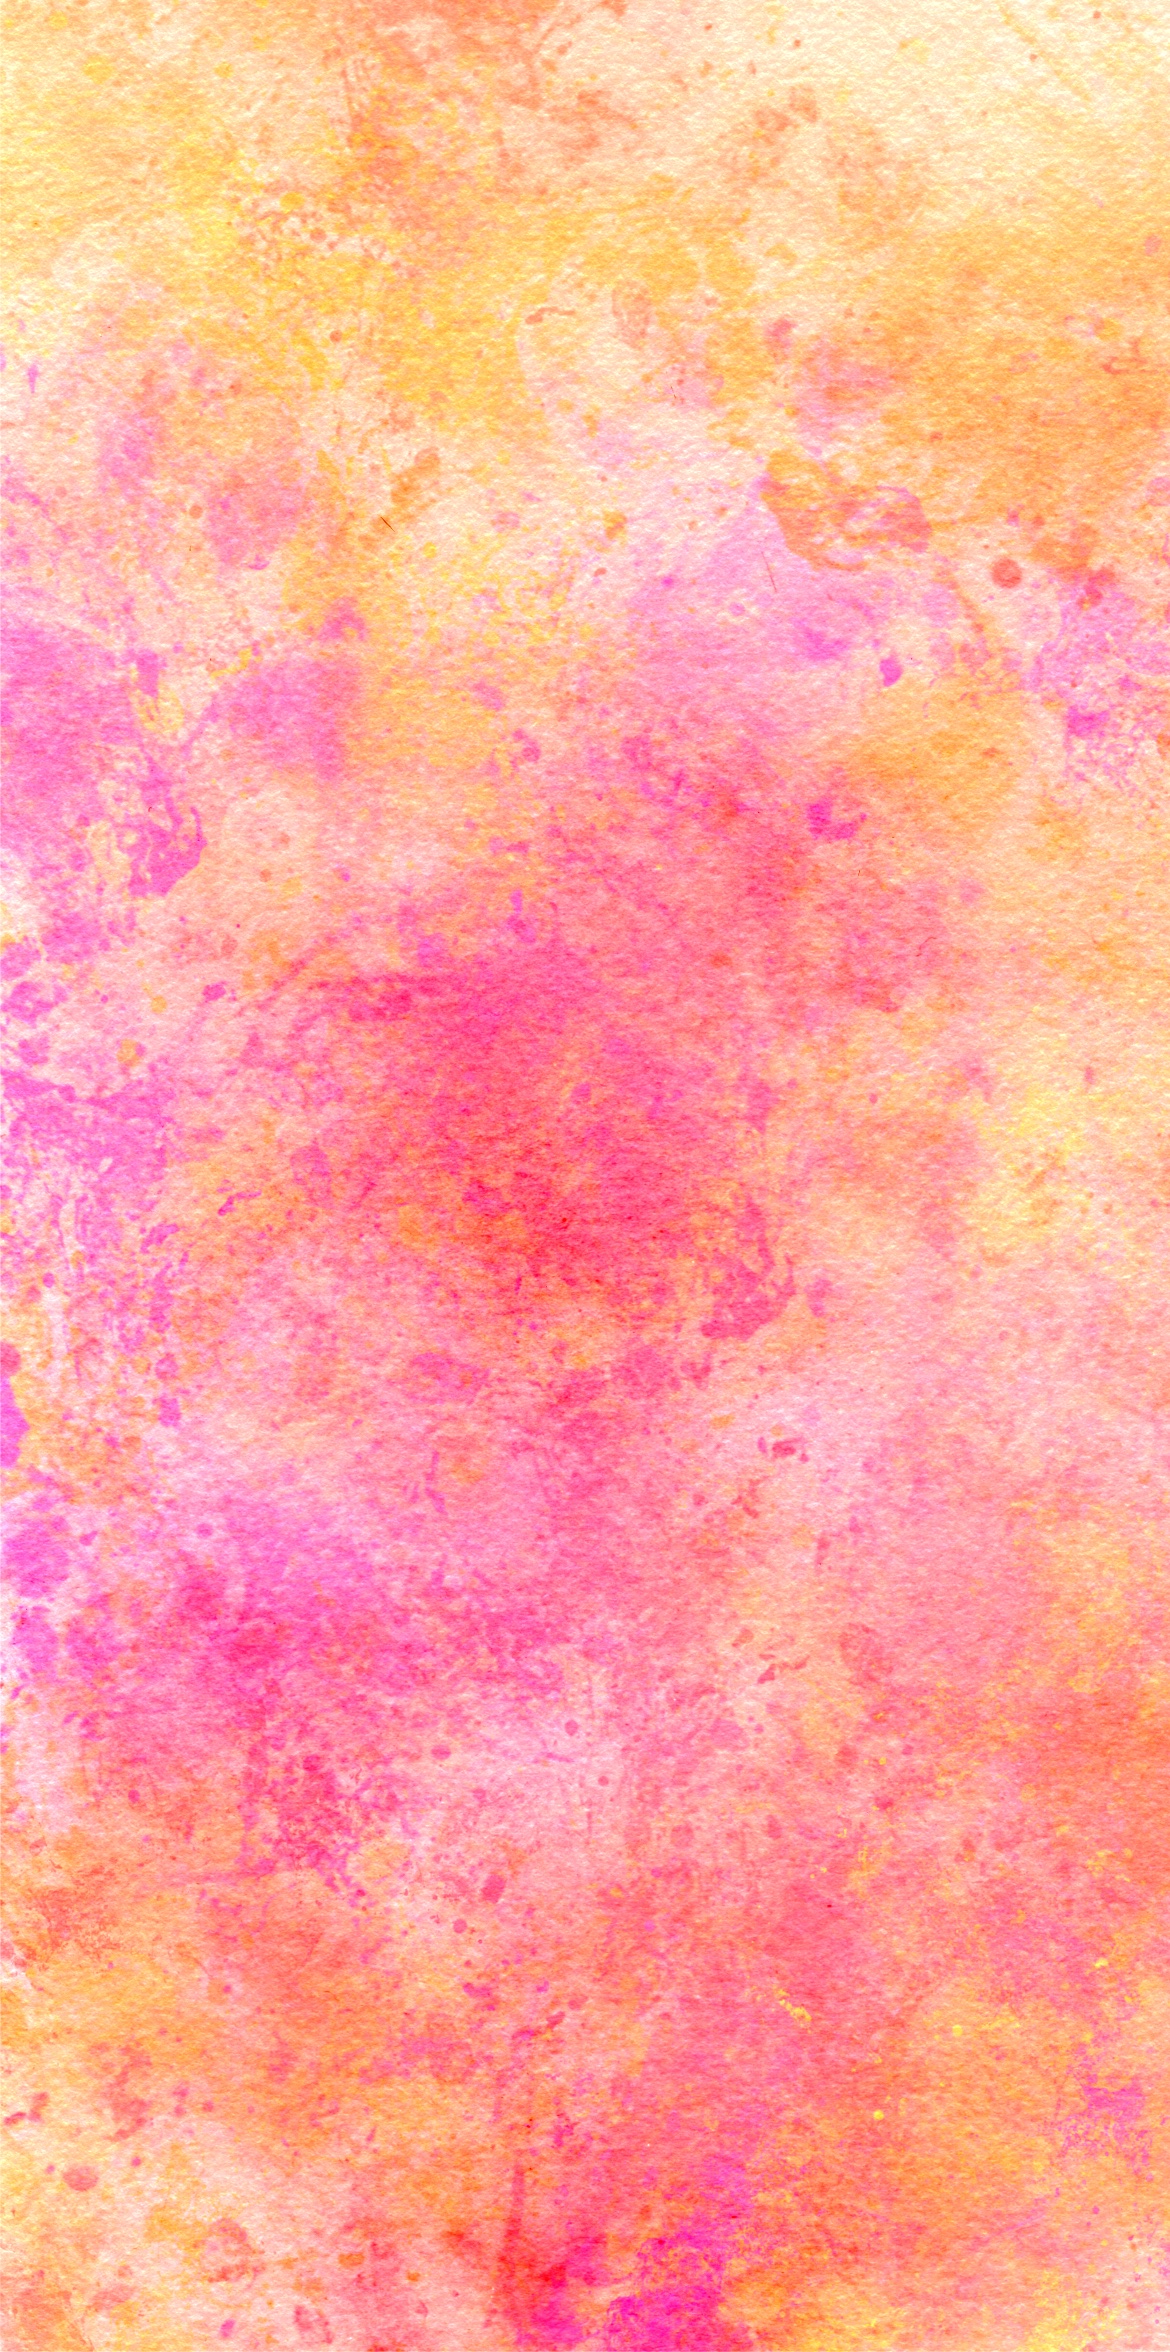 Wallpaper with pink and yellow splotches